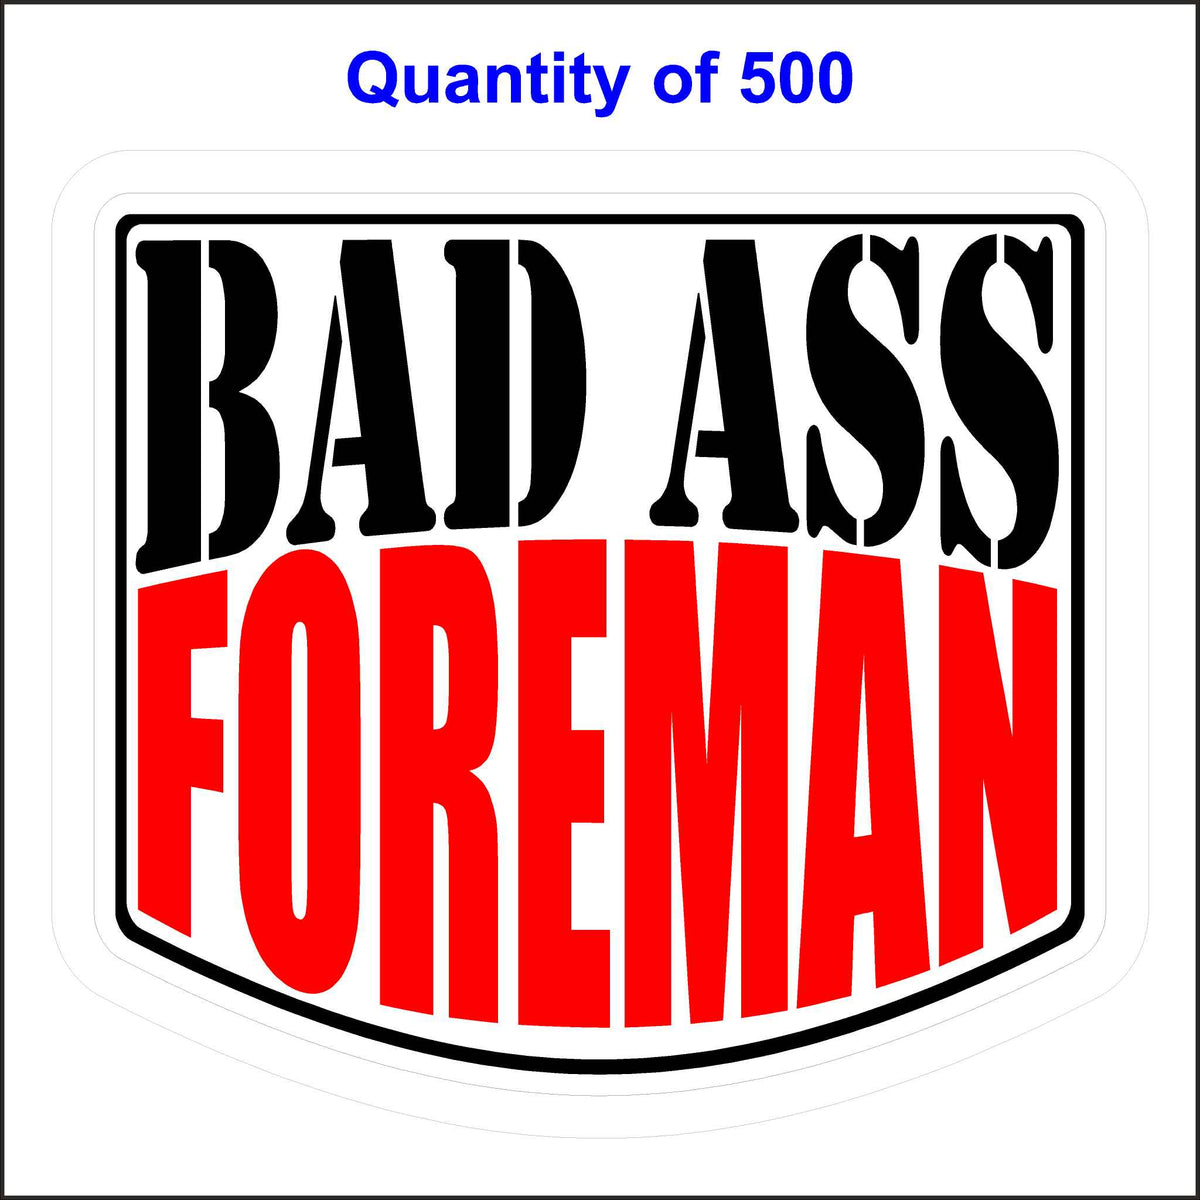 Bad Ass Foreman Stickers 500 Quantity.